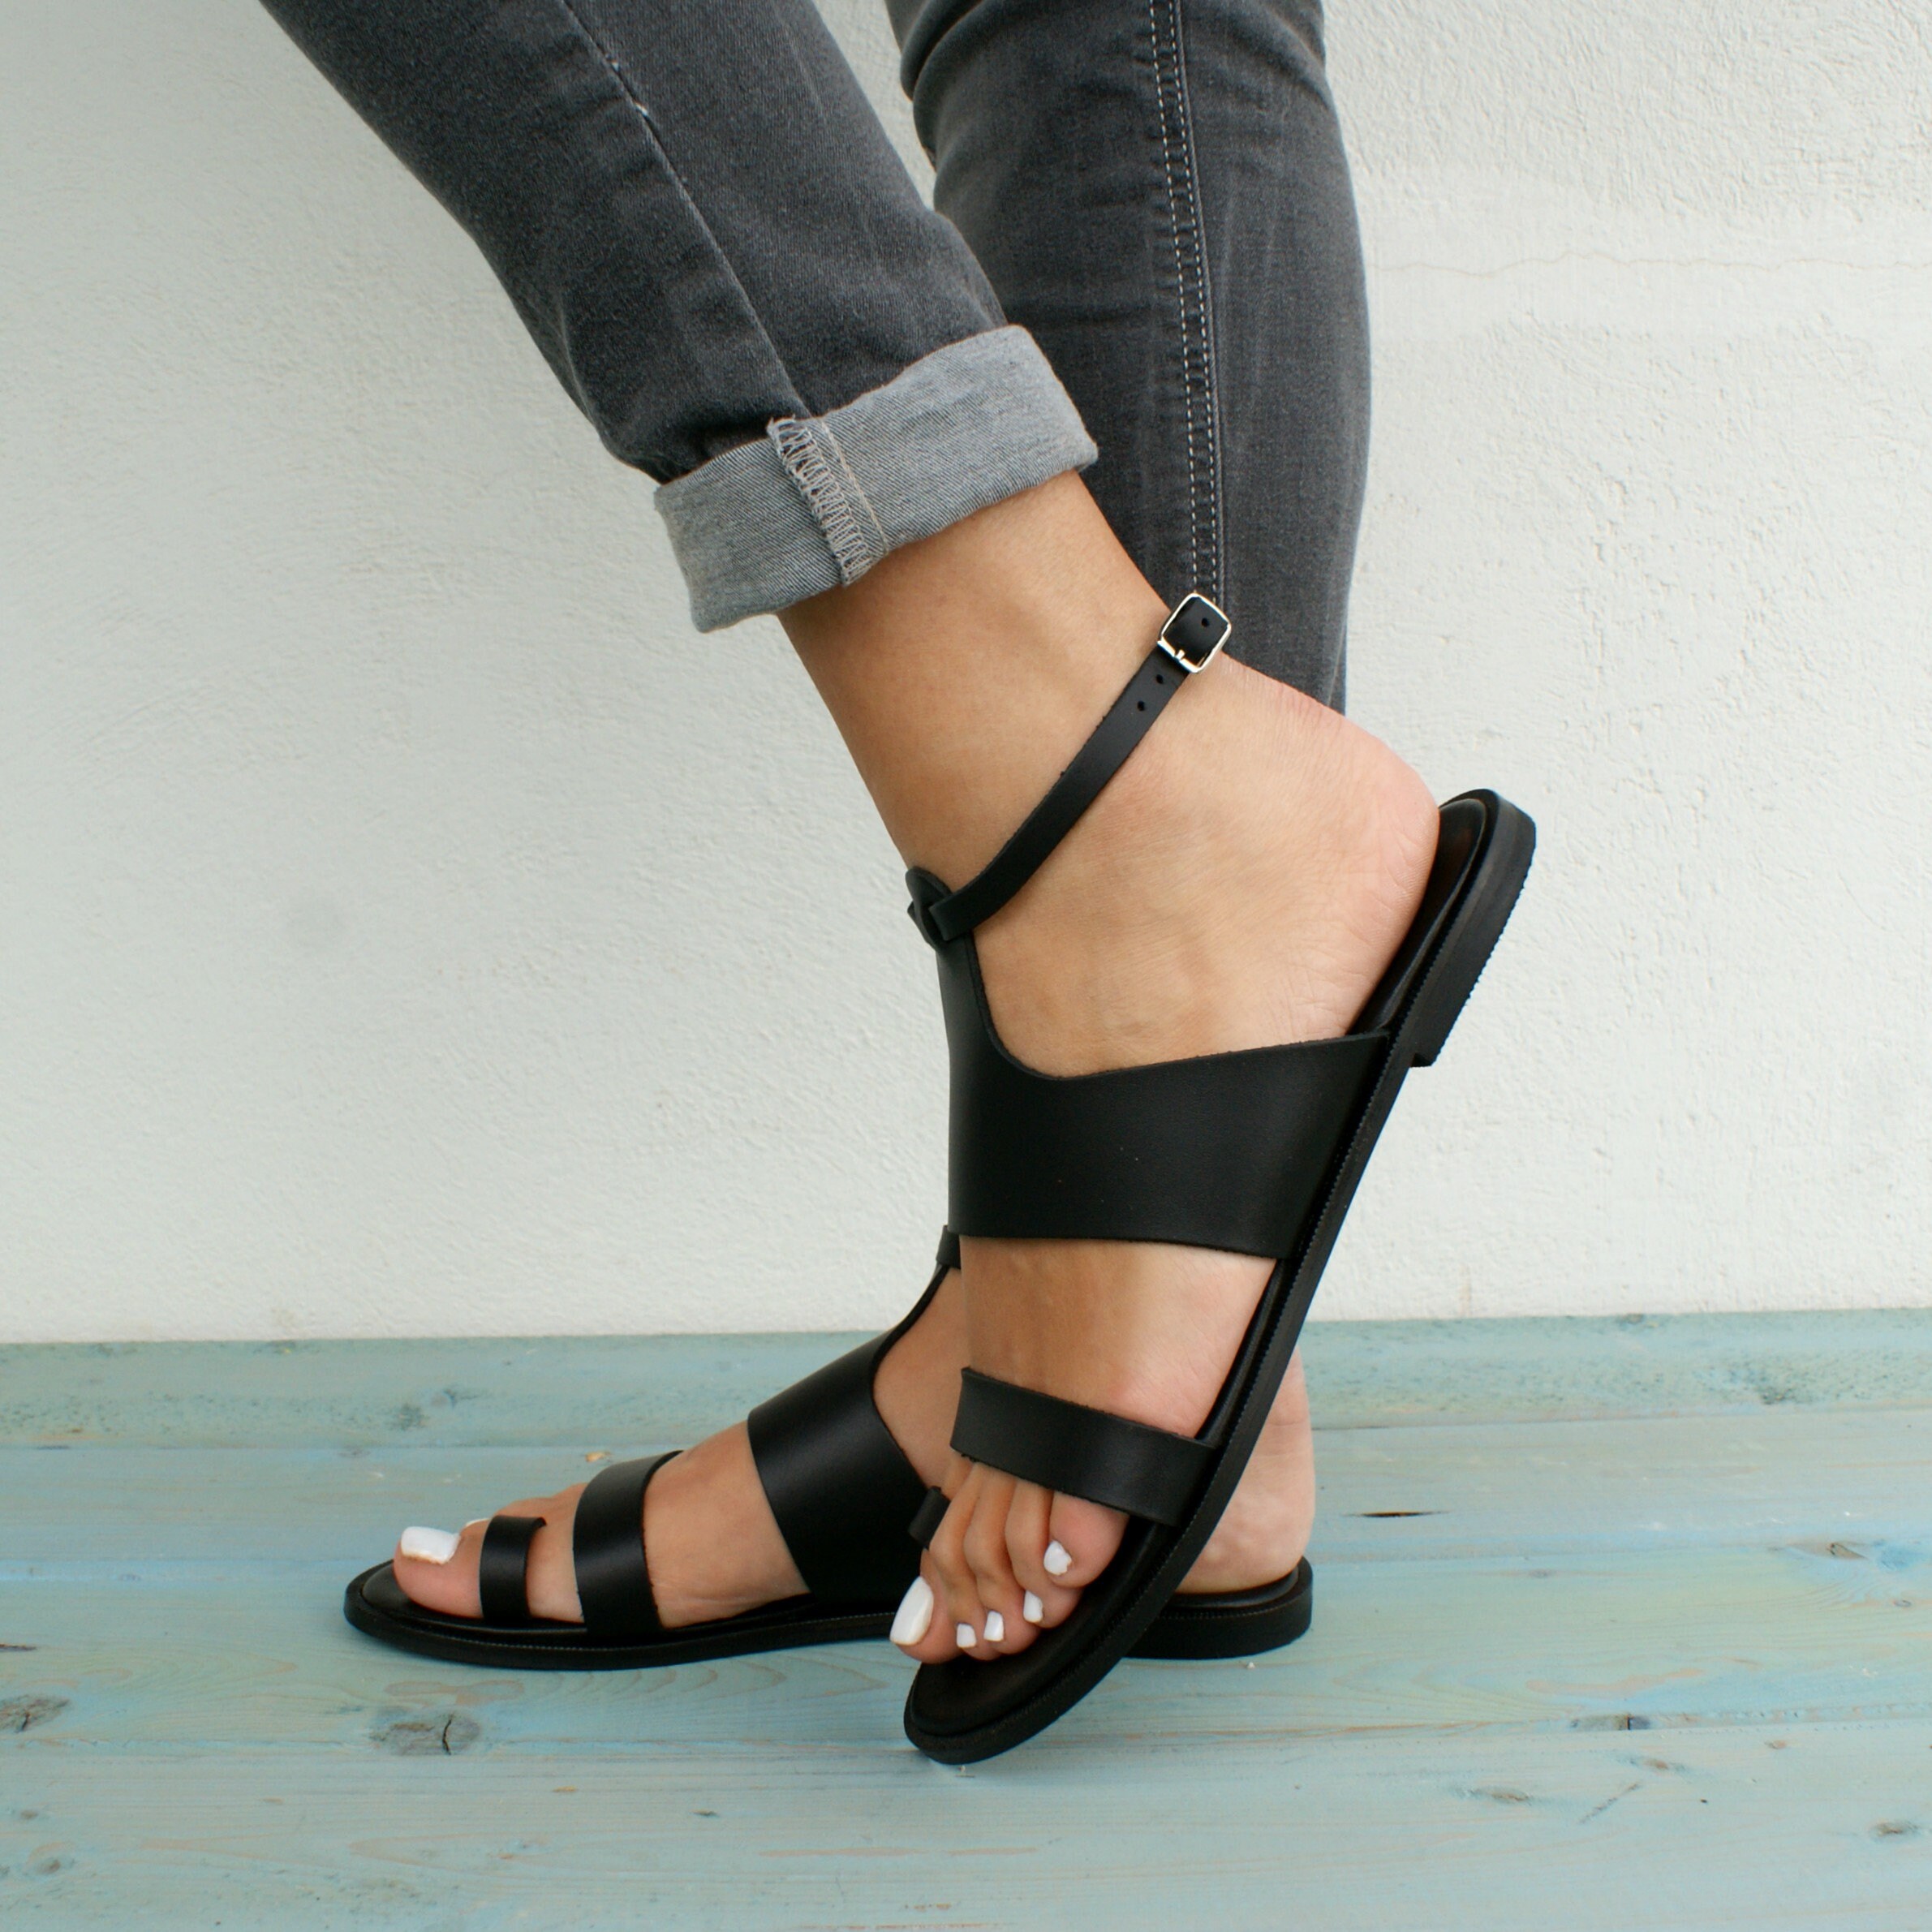 ASTRA 2 Sandals/ Greek Leather Sandals/ Ankle Cuff Sandals/ - Etsy